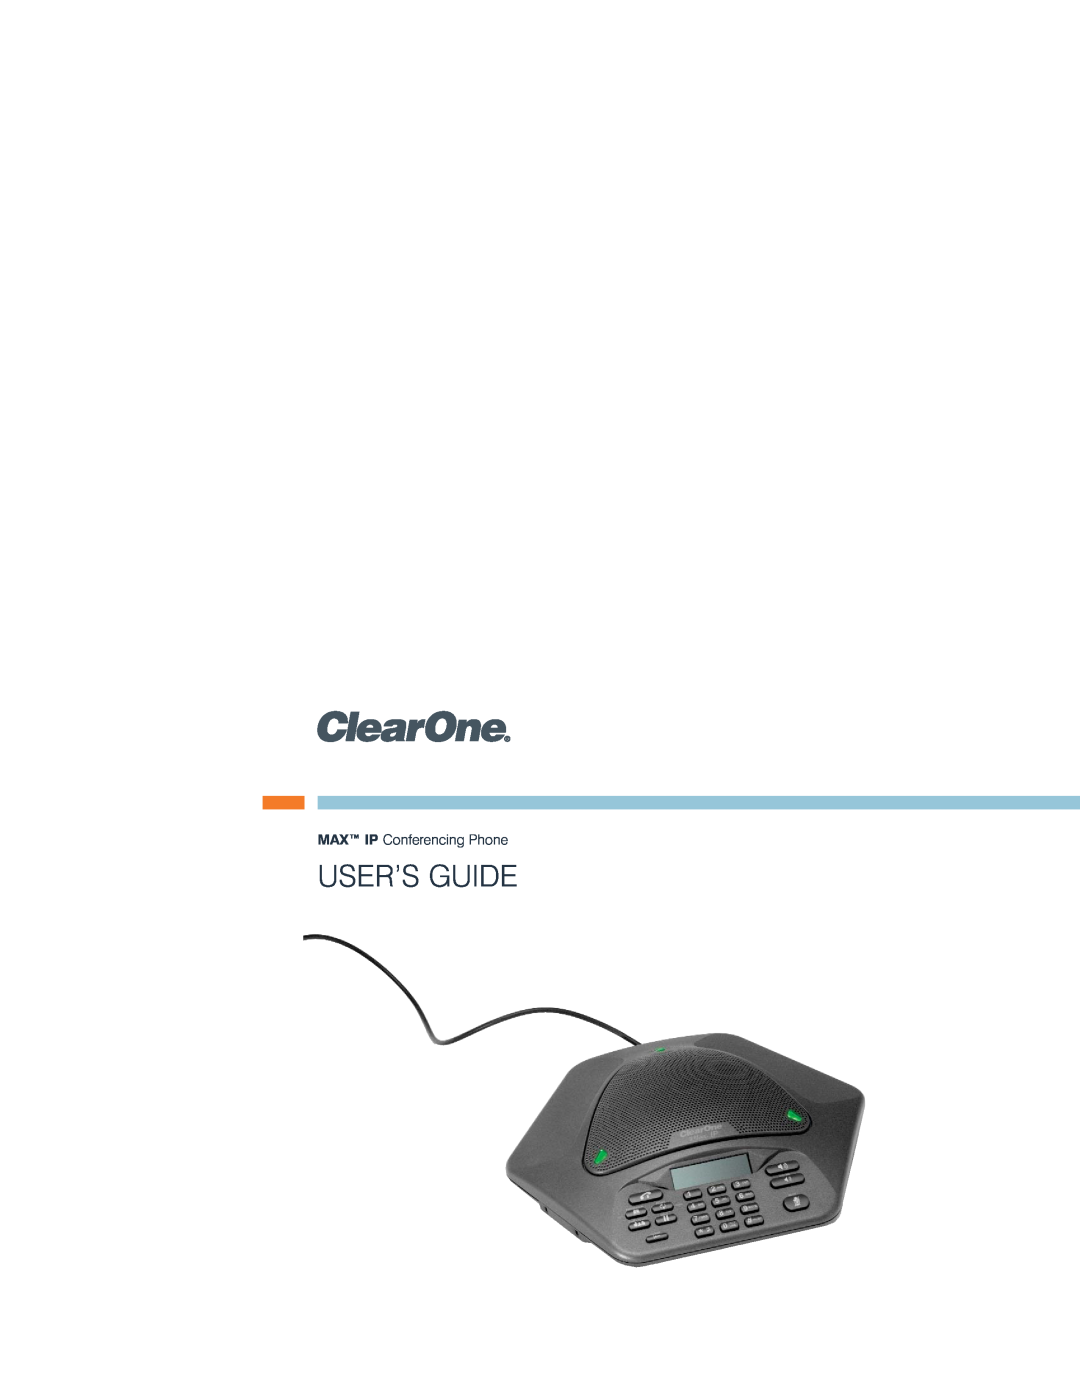 ClearOne comm manual User’S Guide, MAX IP Conferencing Phone 